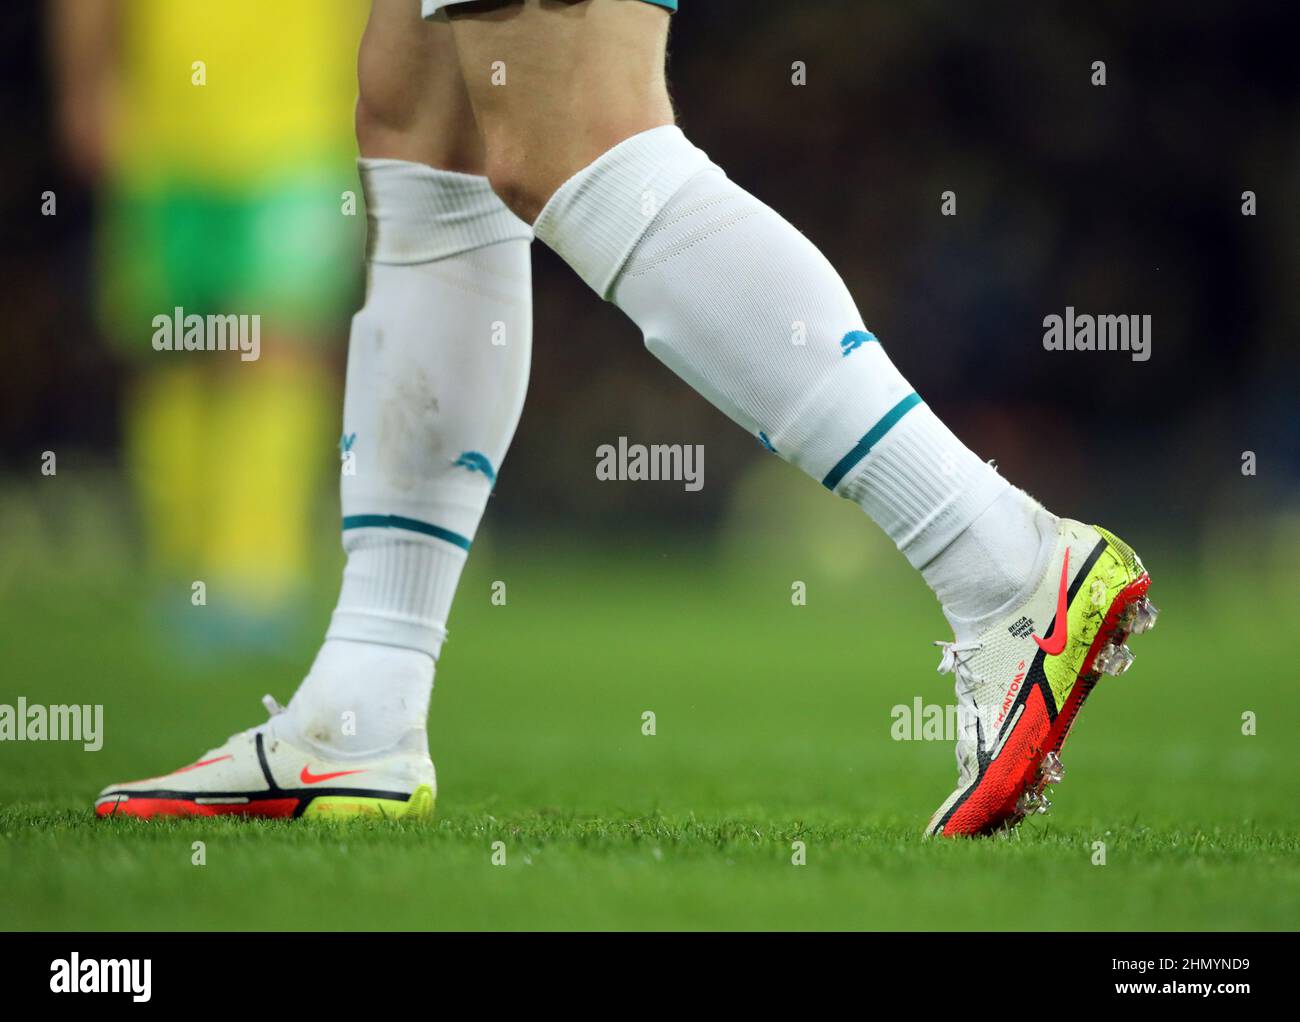 Nike Football High Resolution Stock Photography and Images - Alamy